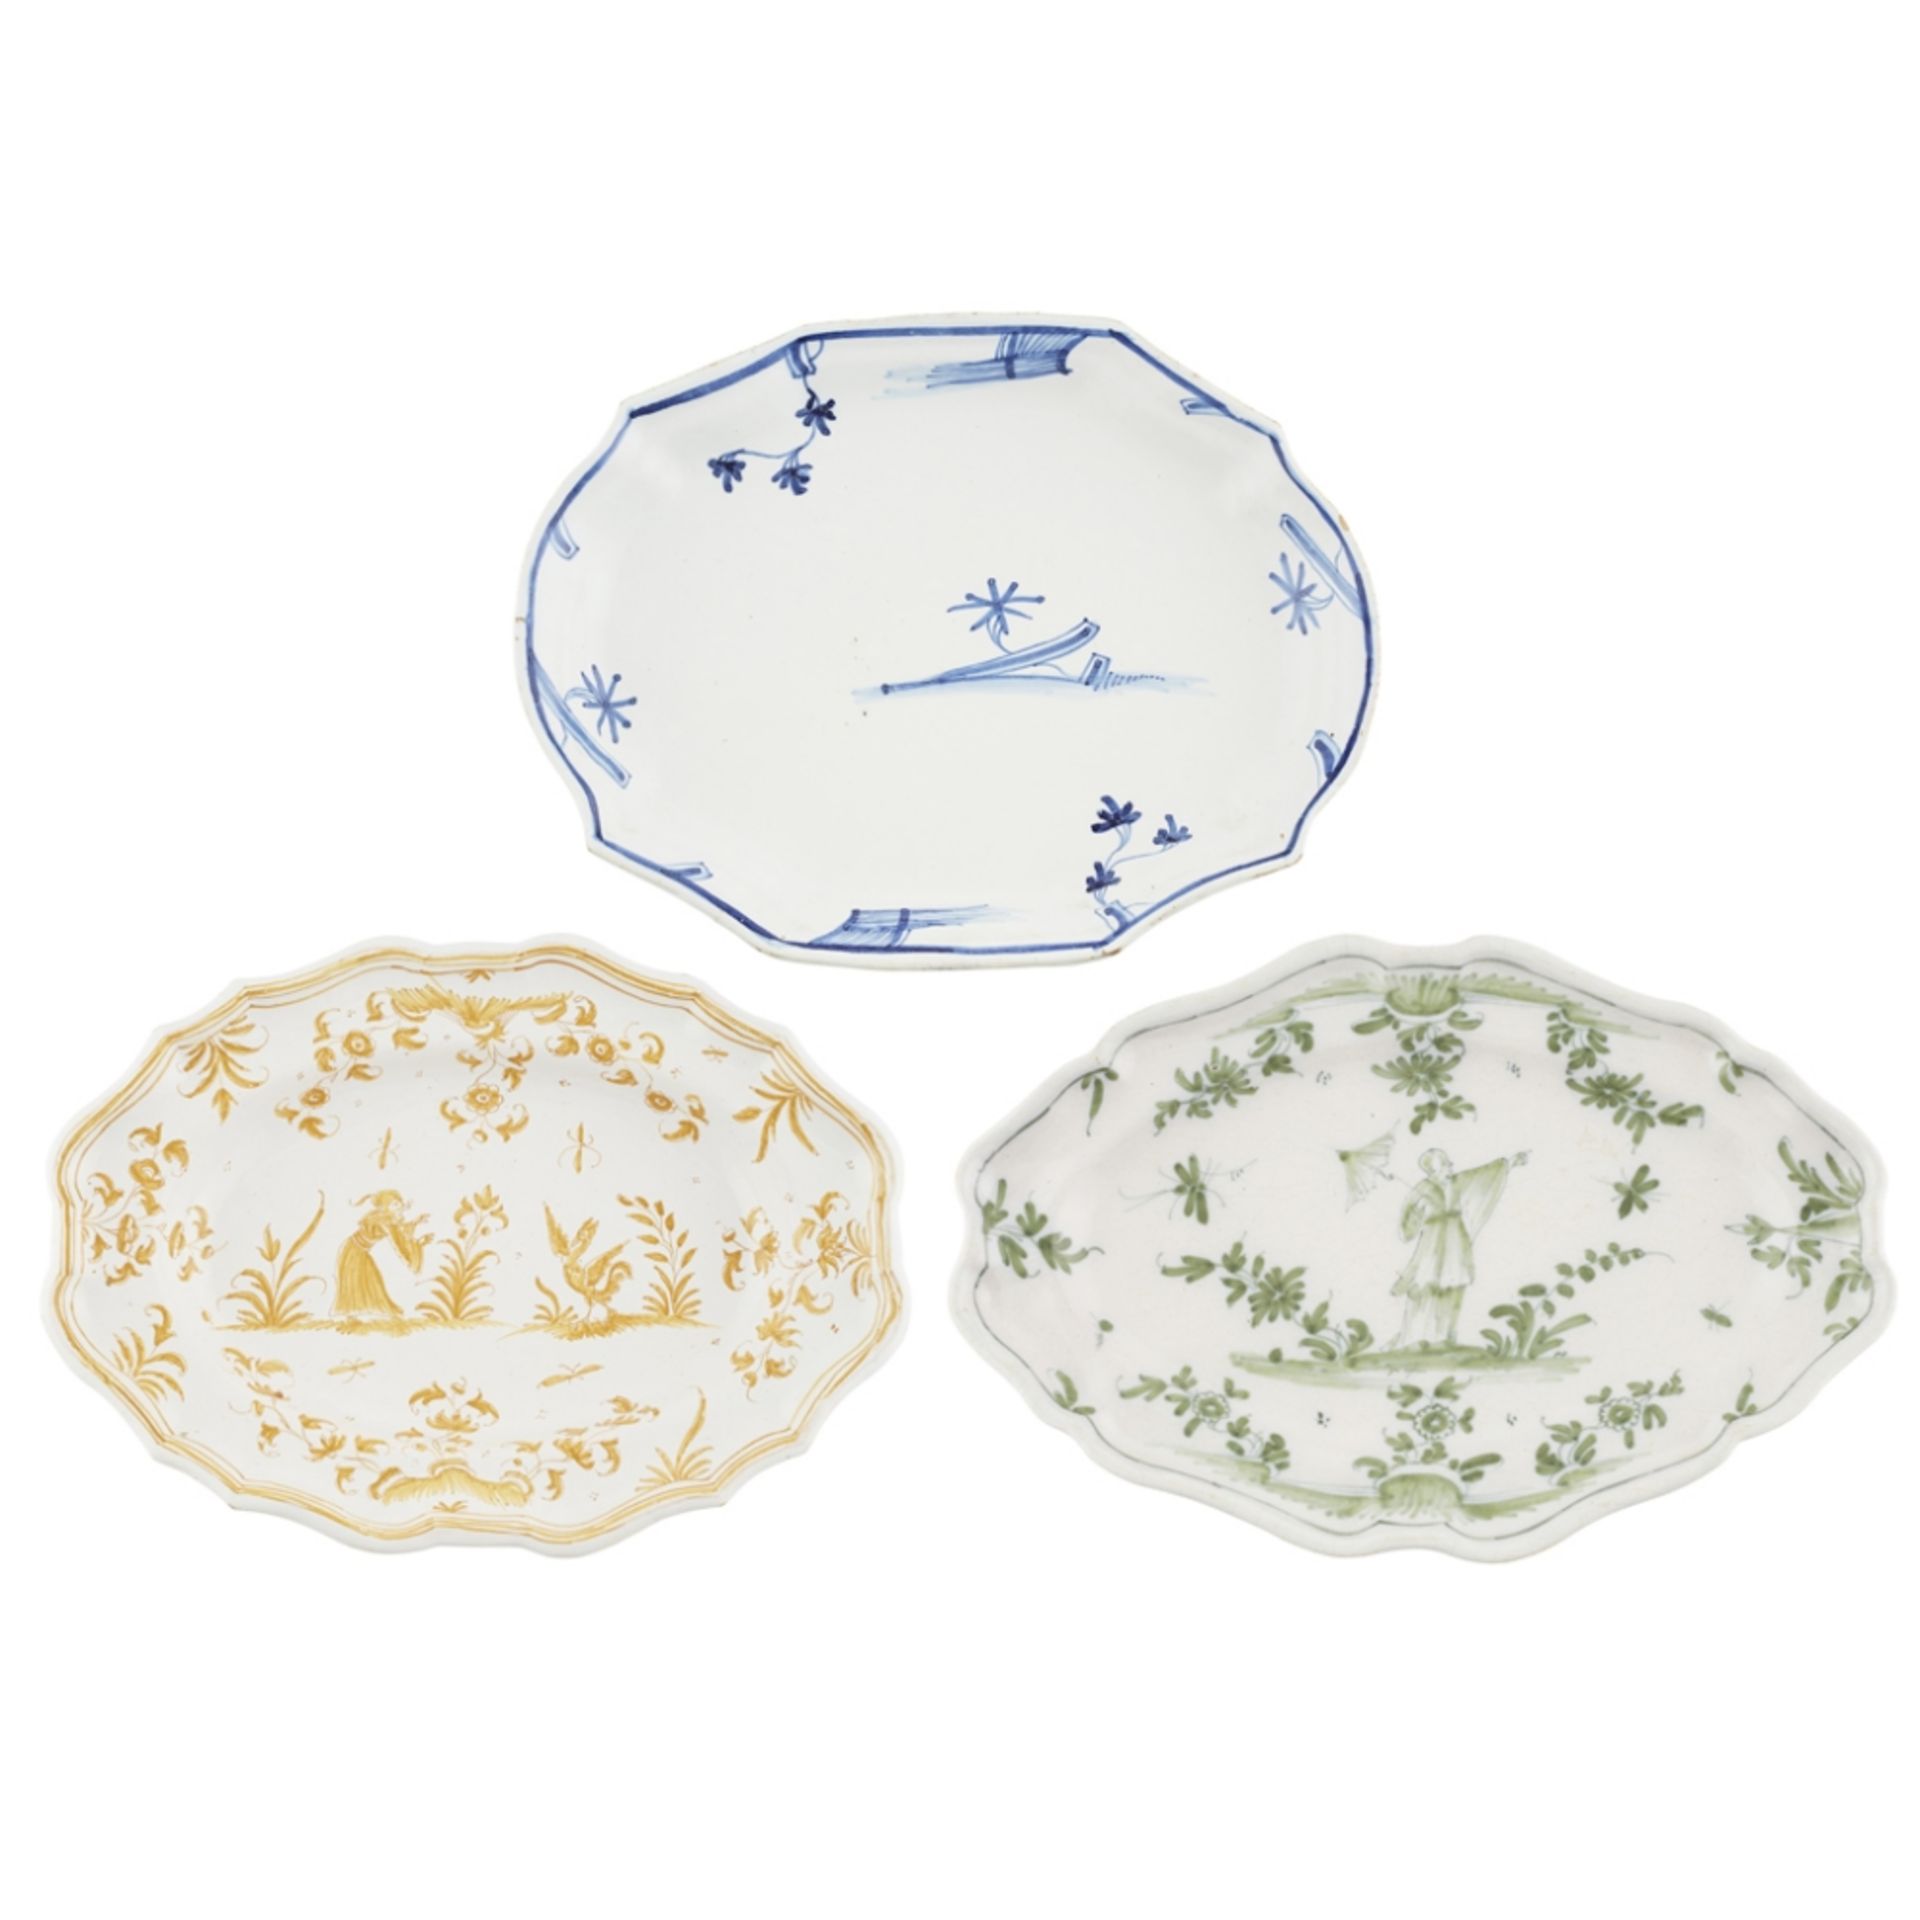 THREE MONOCHROME FRENCH FAIENCE PLATTERS18TH CENTURY of shaped oval form with lobed rims, comprising